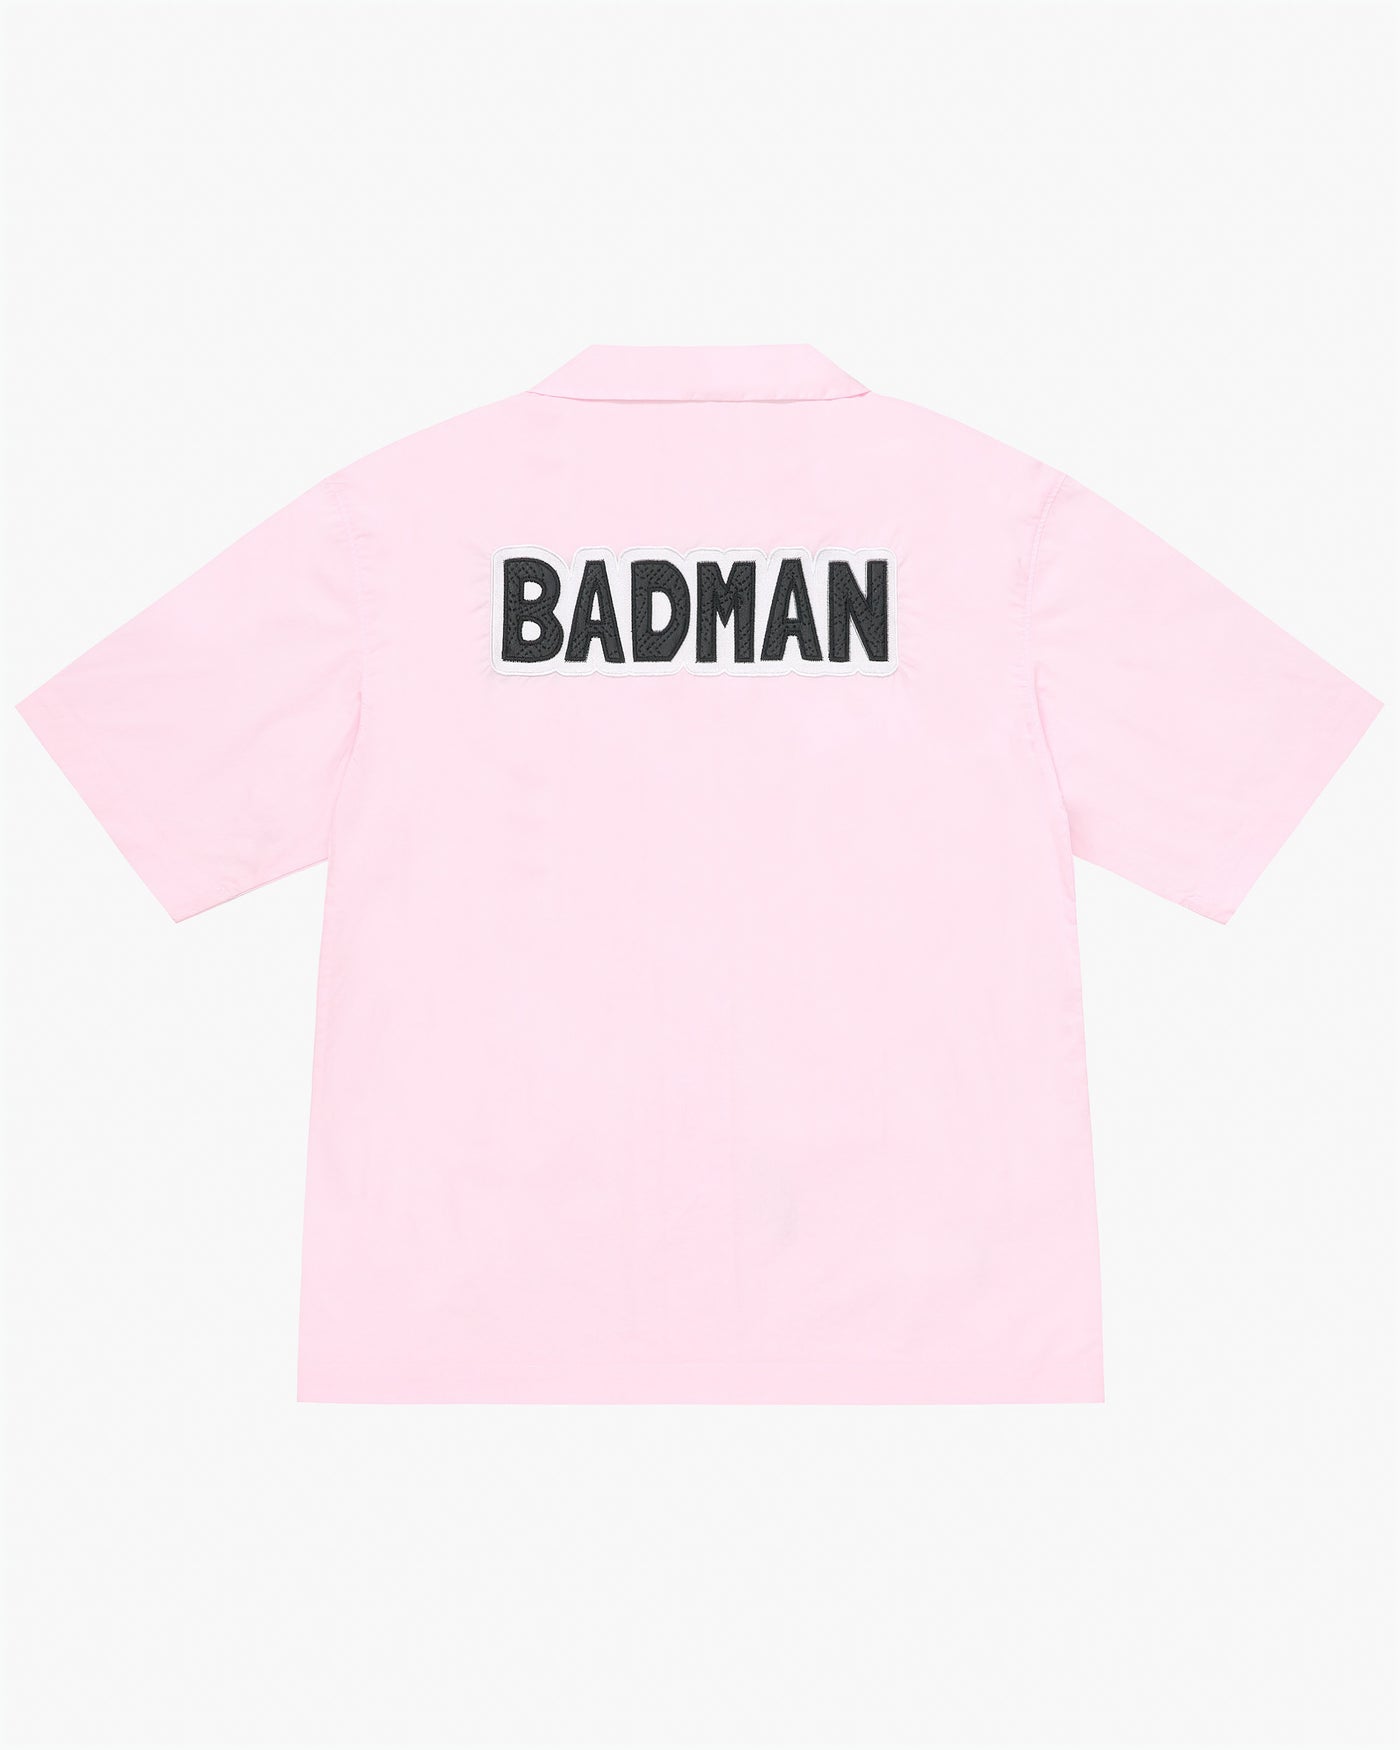 BADMAN Vacation Button Up Tee / Sun-Dried Pink